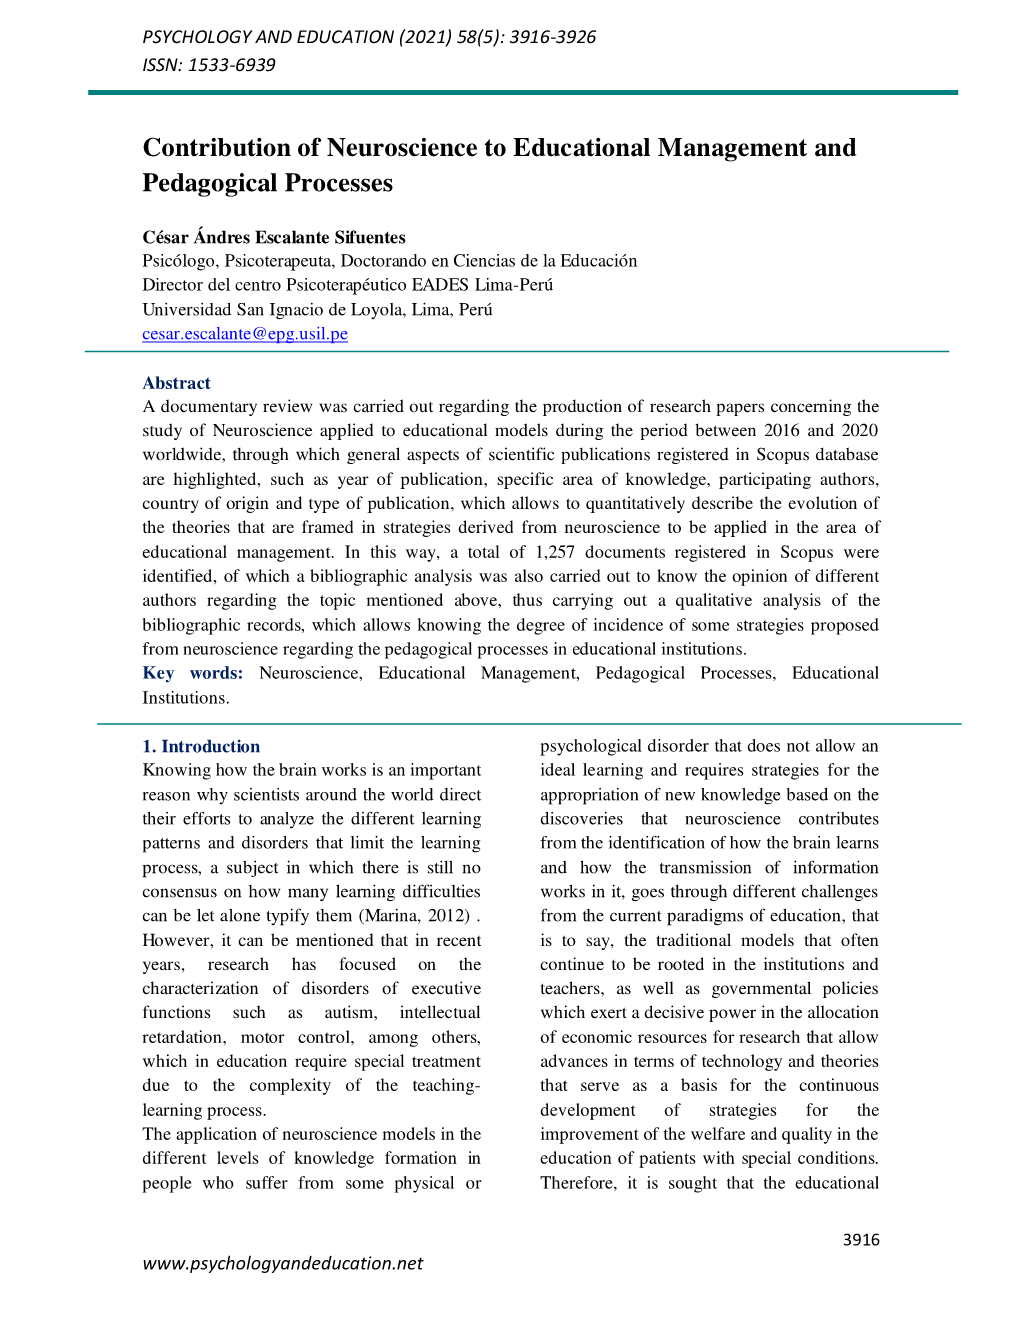 Contribution of Neuroscience to Educational Management and Pedagogical Processes